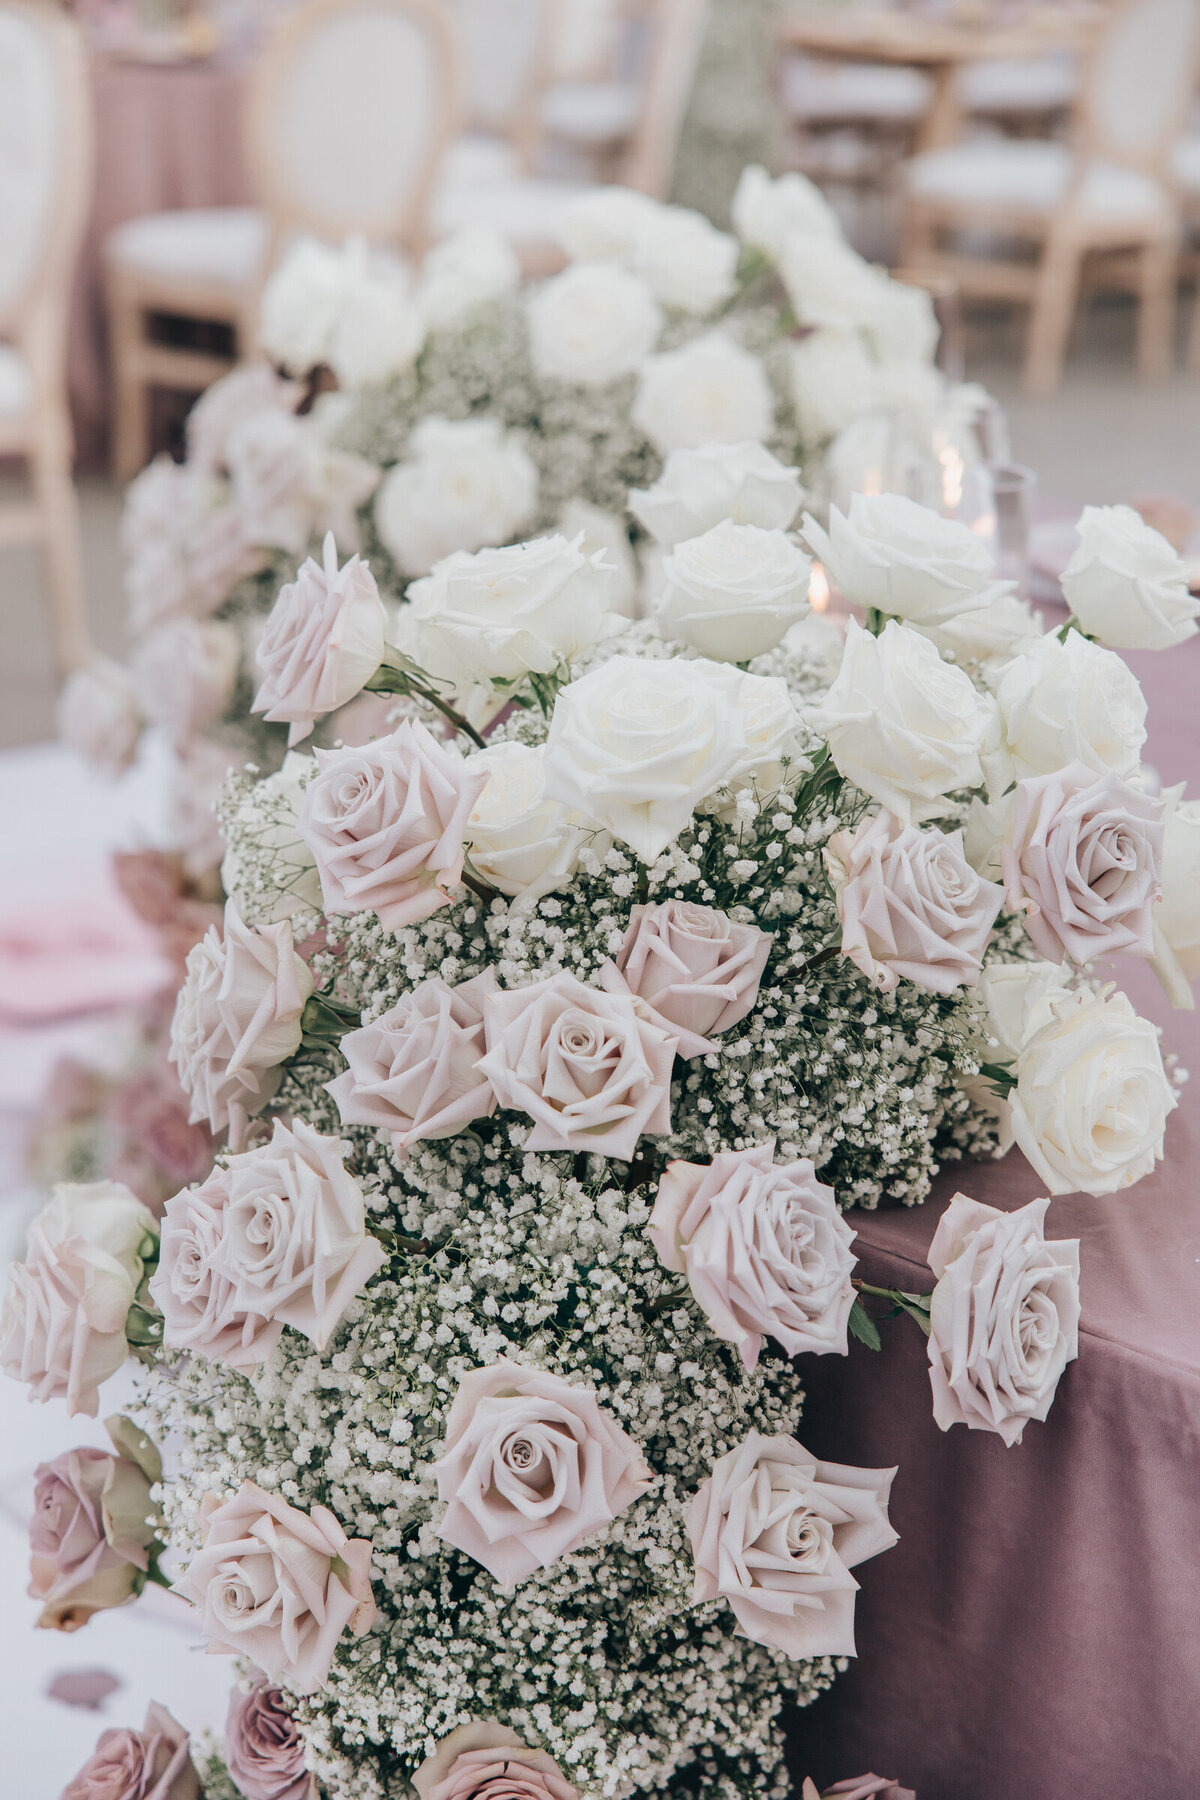 Glamorous blush and white roses wedding table florals